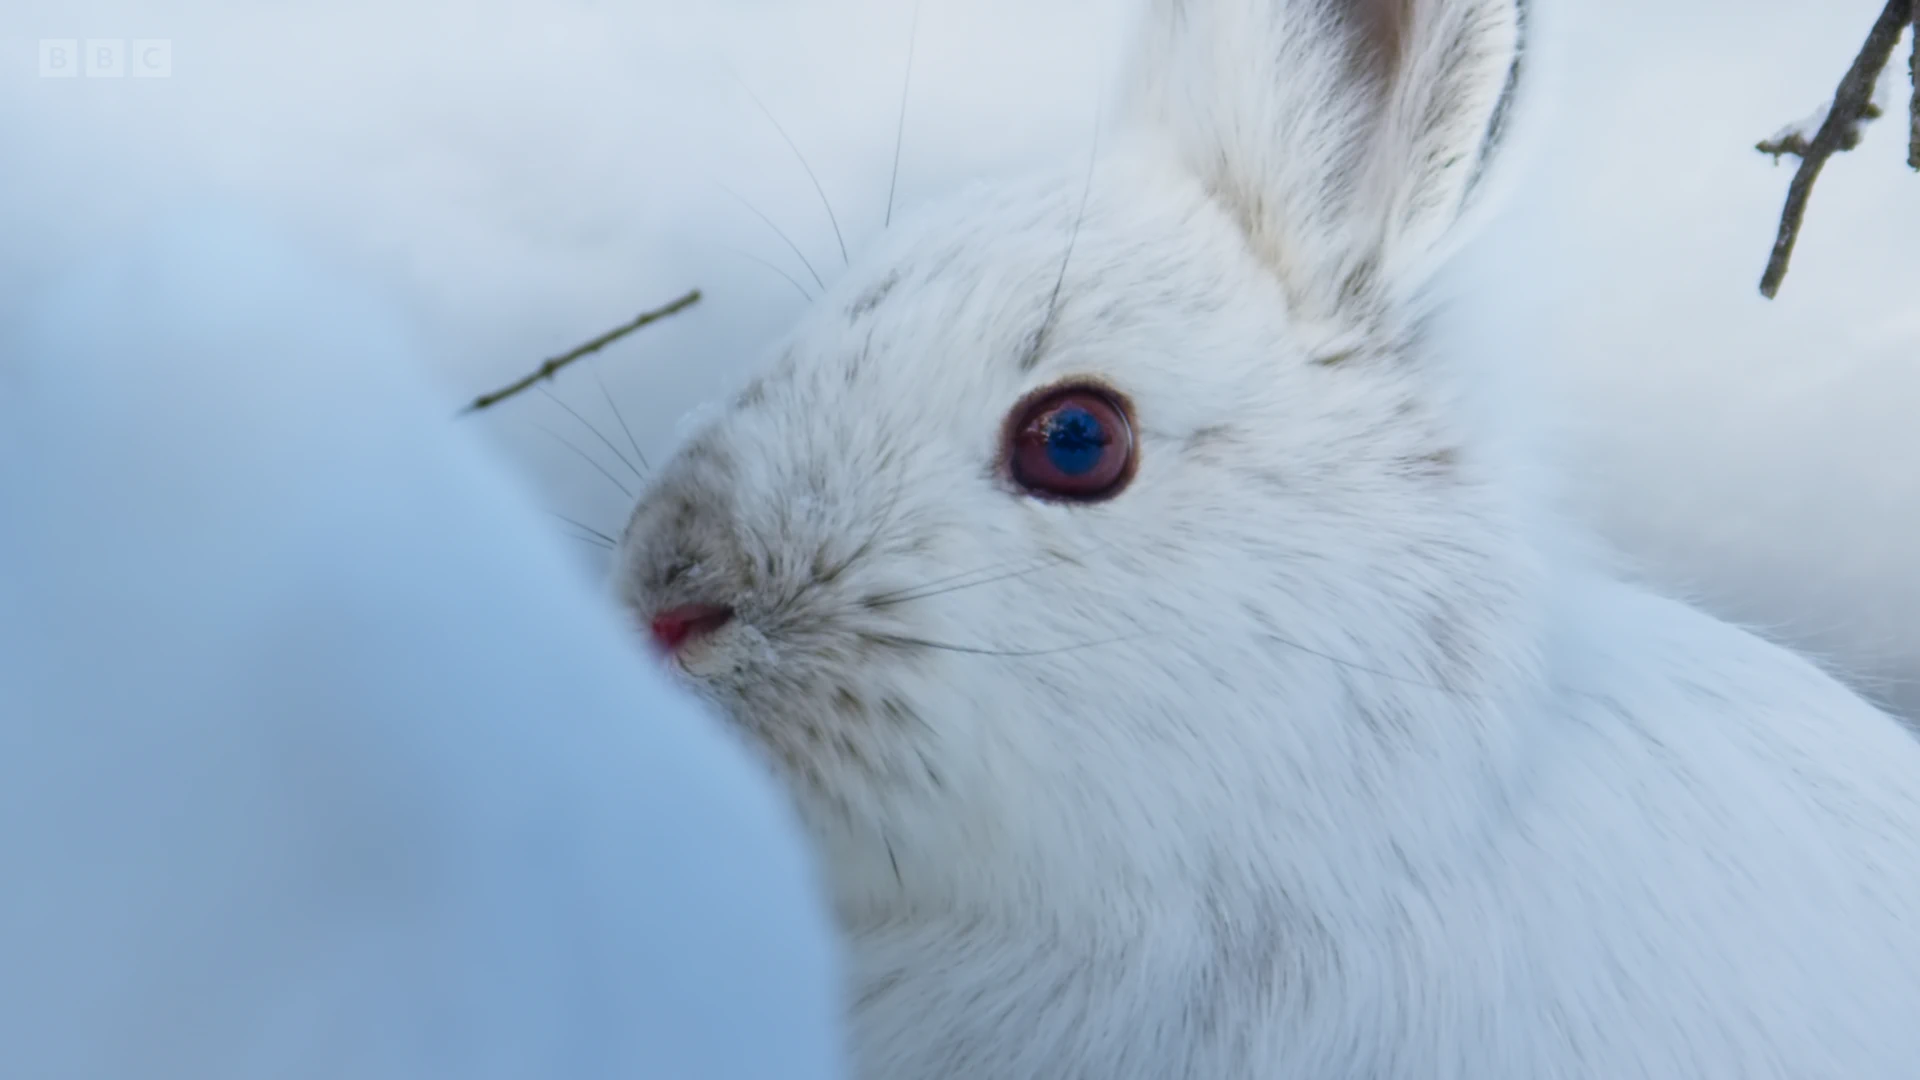 Snowshoe hare (Lepus americanus dalli) as shown in Seven Worlds, One Planet - North America